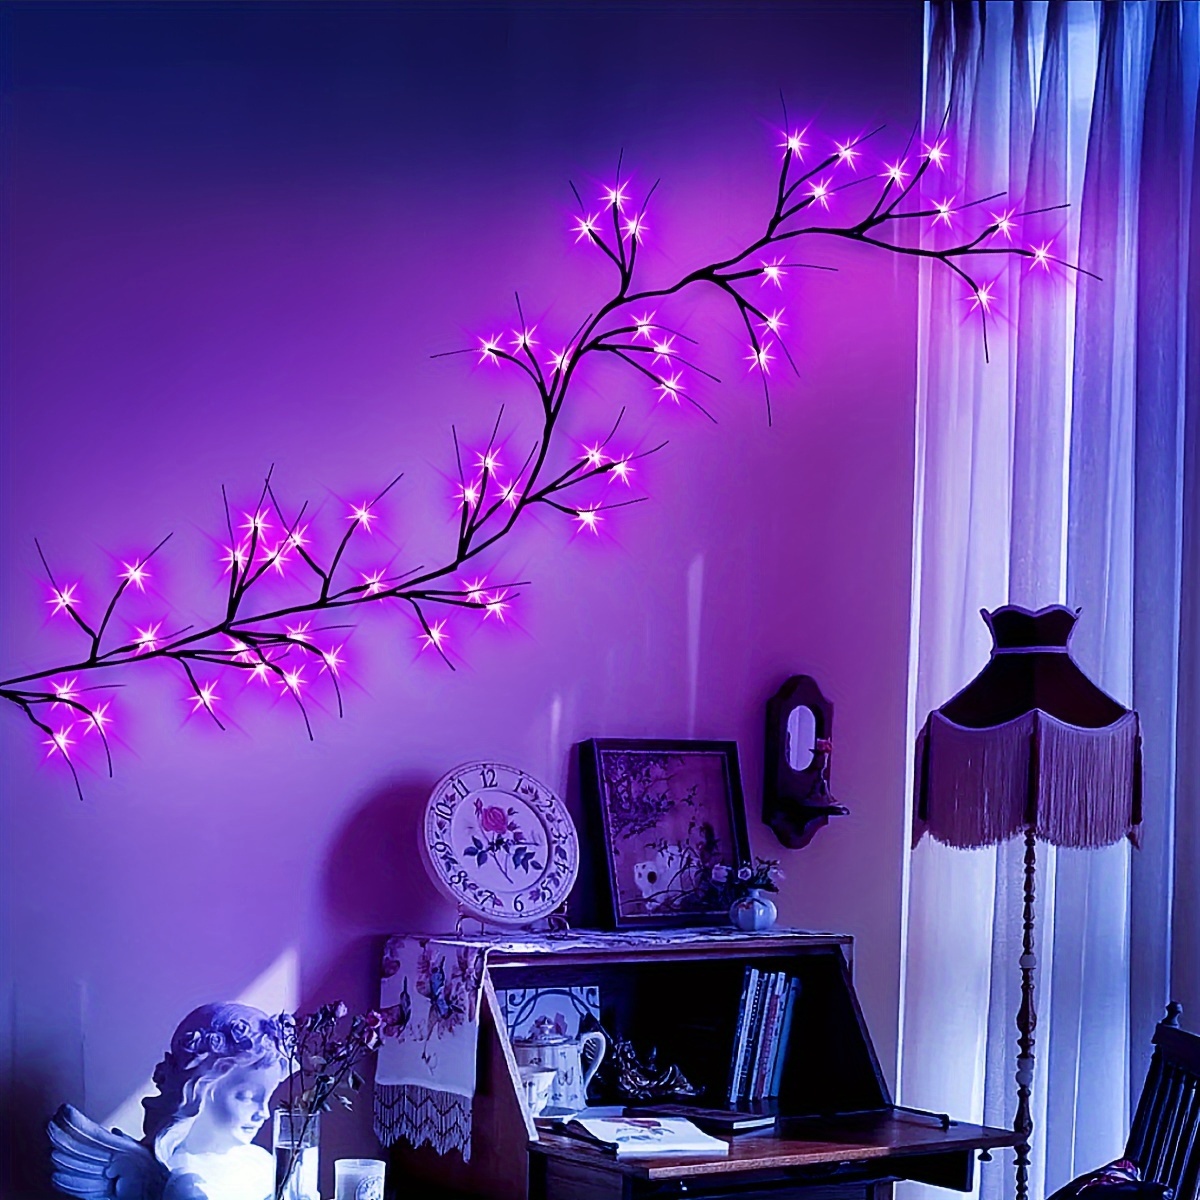 

1pc 48 Led Branches Garland String Lights, 1.7m/5.57ft Willow Vine Twig Decorations, Waterproof Light Usb Operated Fairy Light For Wall Bedroom Home Fireplace Mantle Indoor Valentine's Day Decor